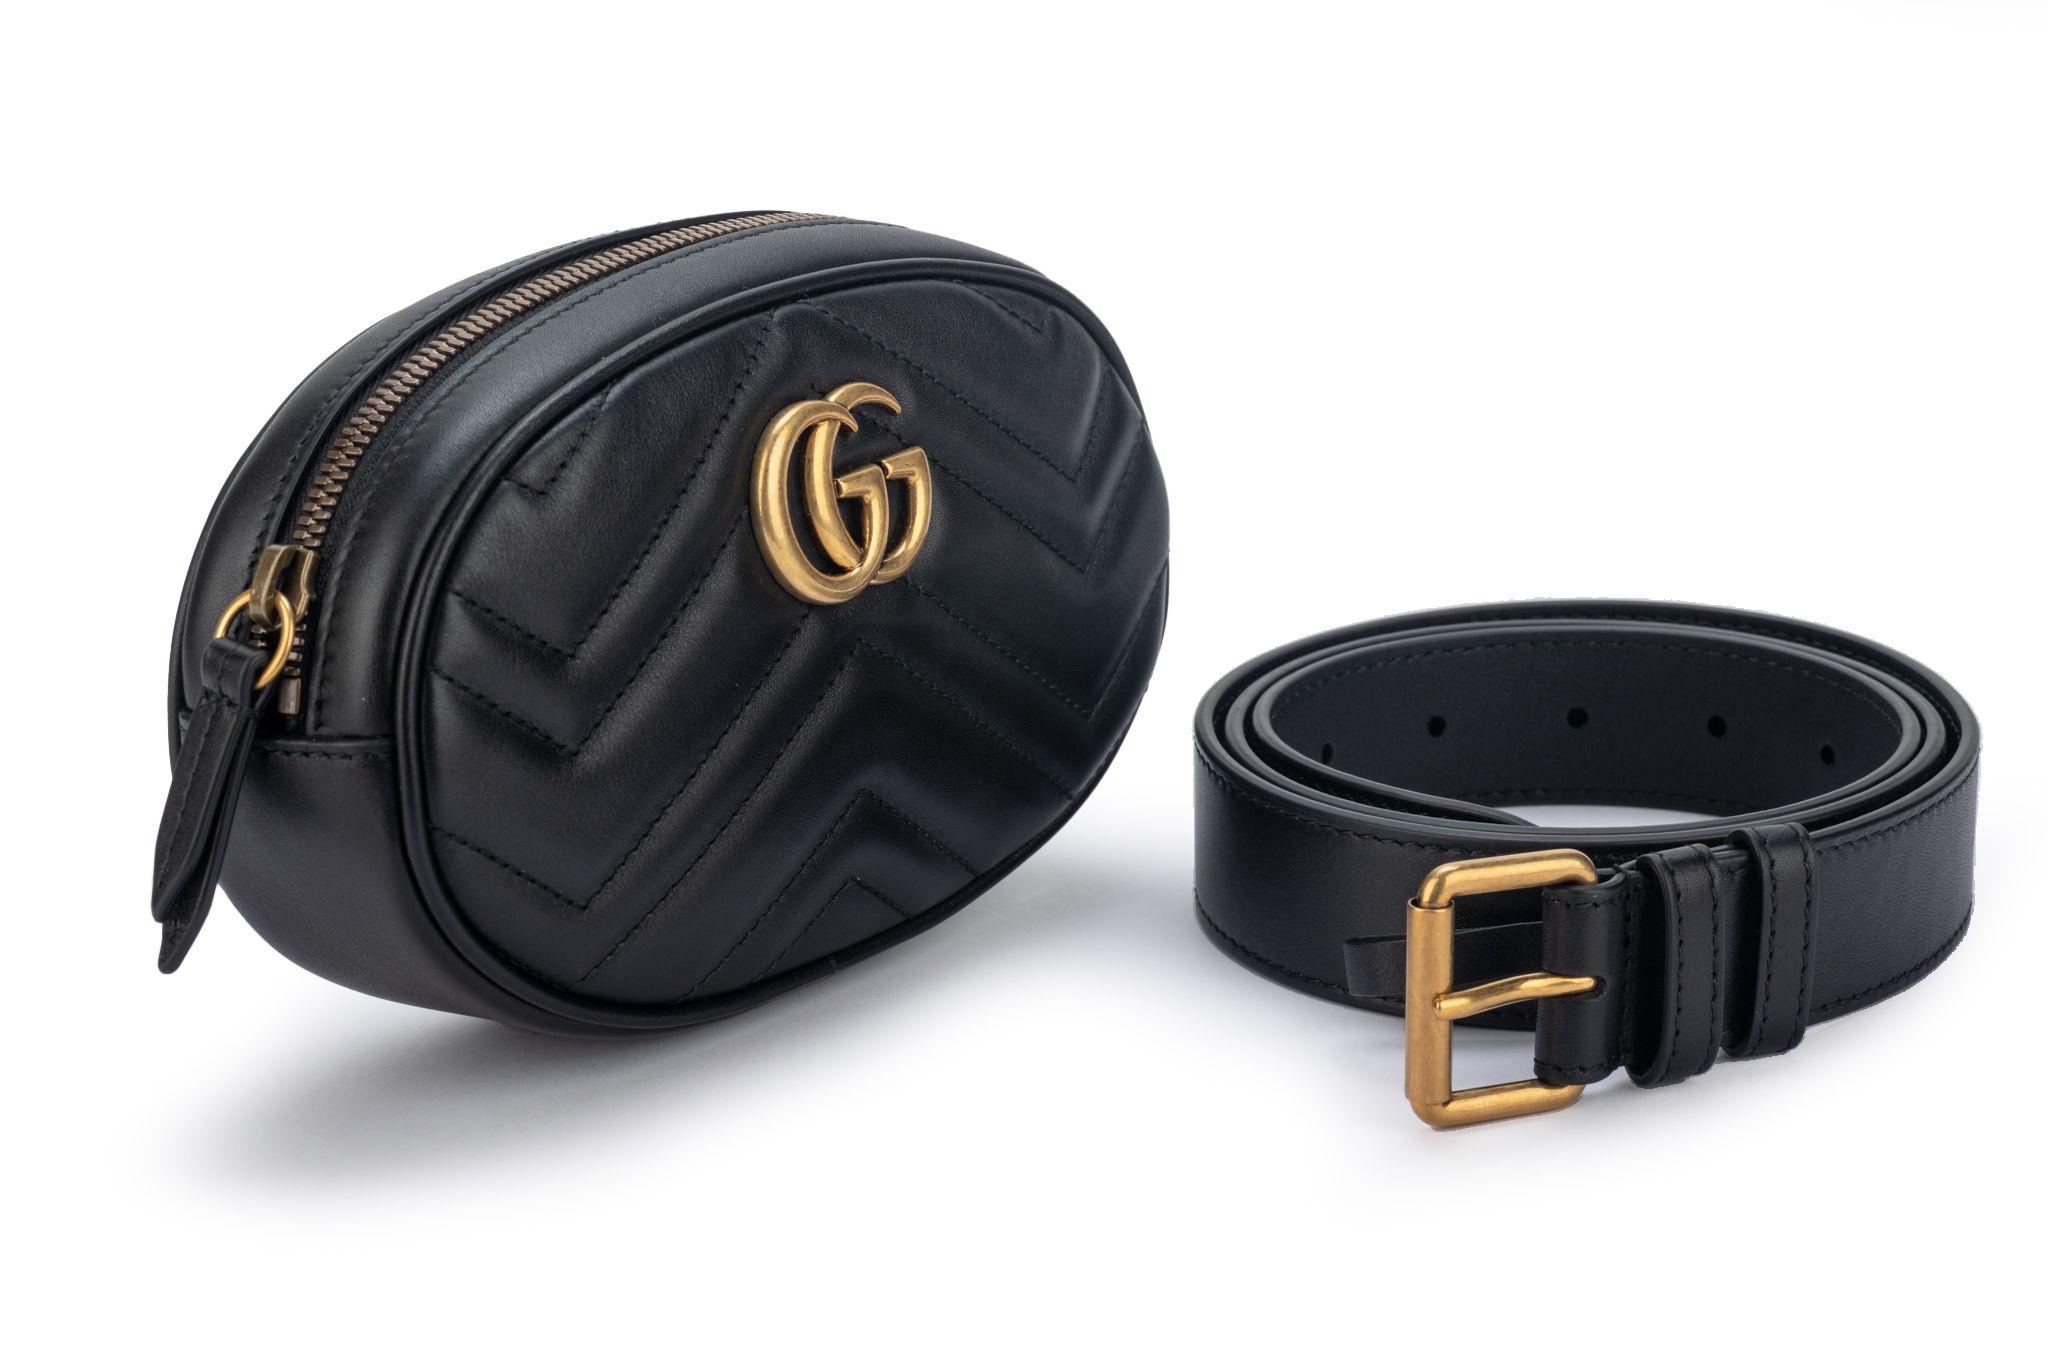 Gucci new black marmont quilted fanny pack with gg logo. Adjustable belt up to 41